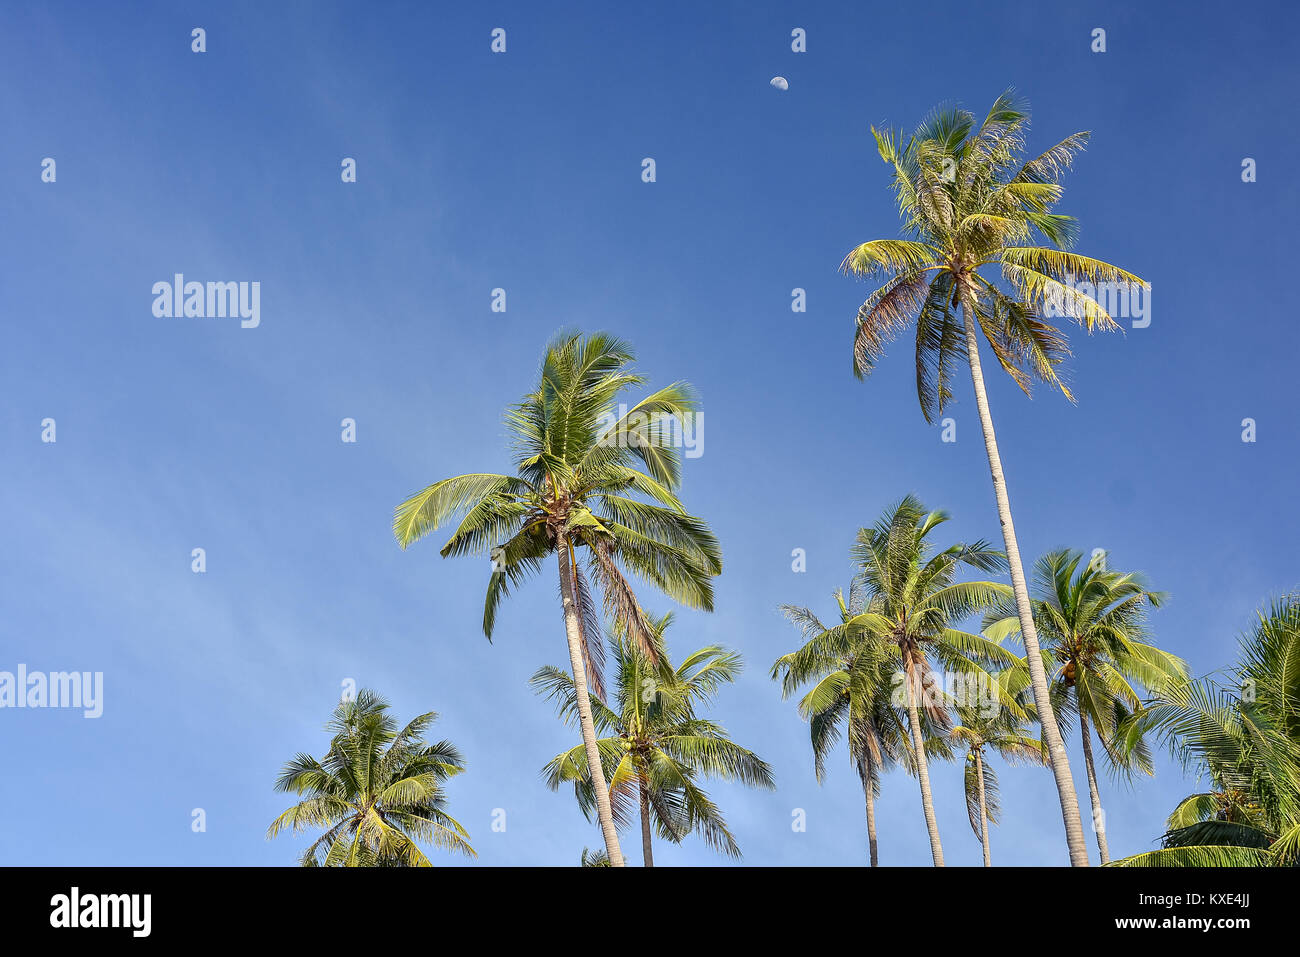 Upwards view of the tops of tall palm trees against a clear blue sky and a half moon in the distance. Stock Photo